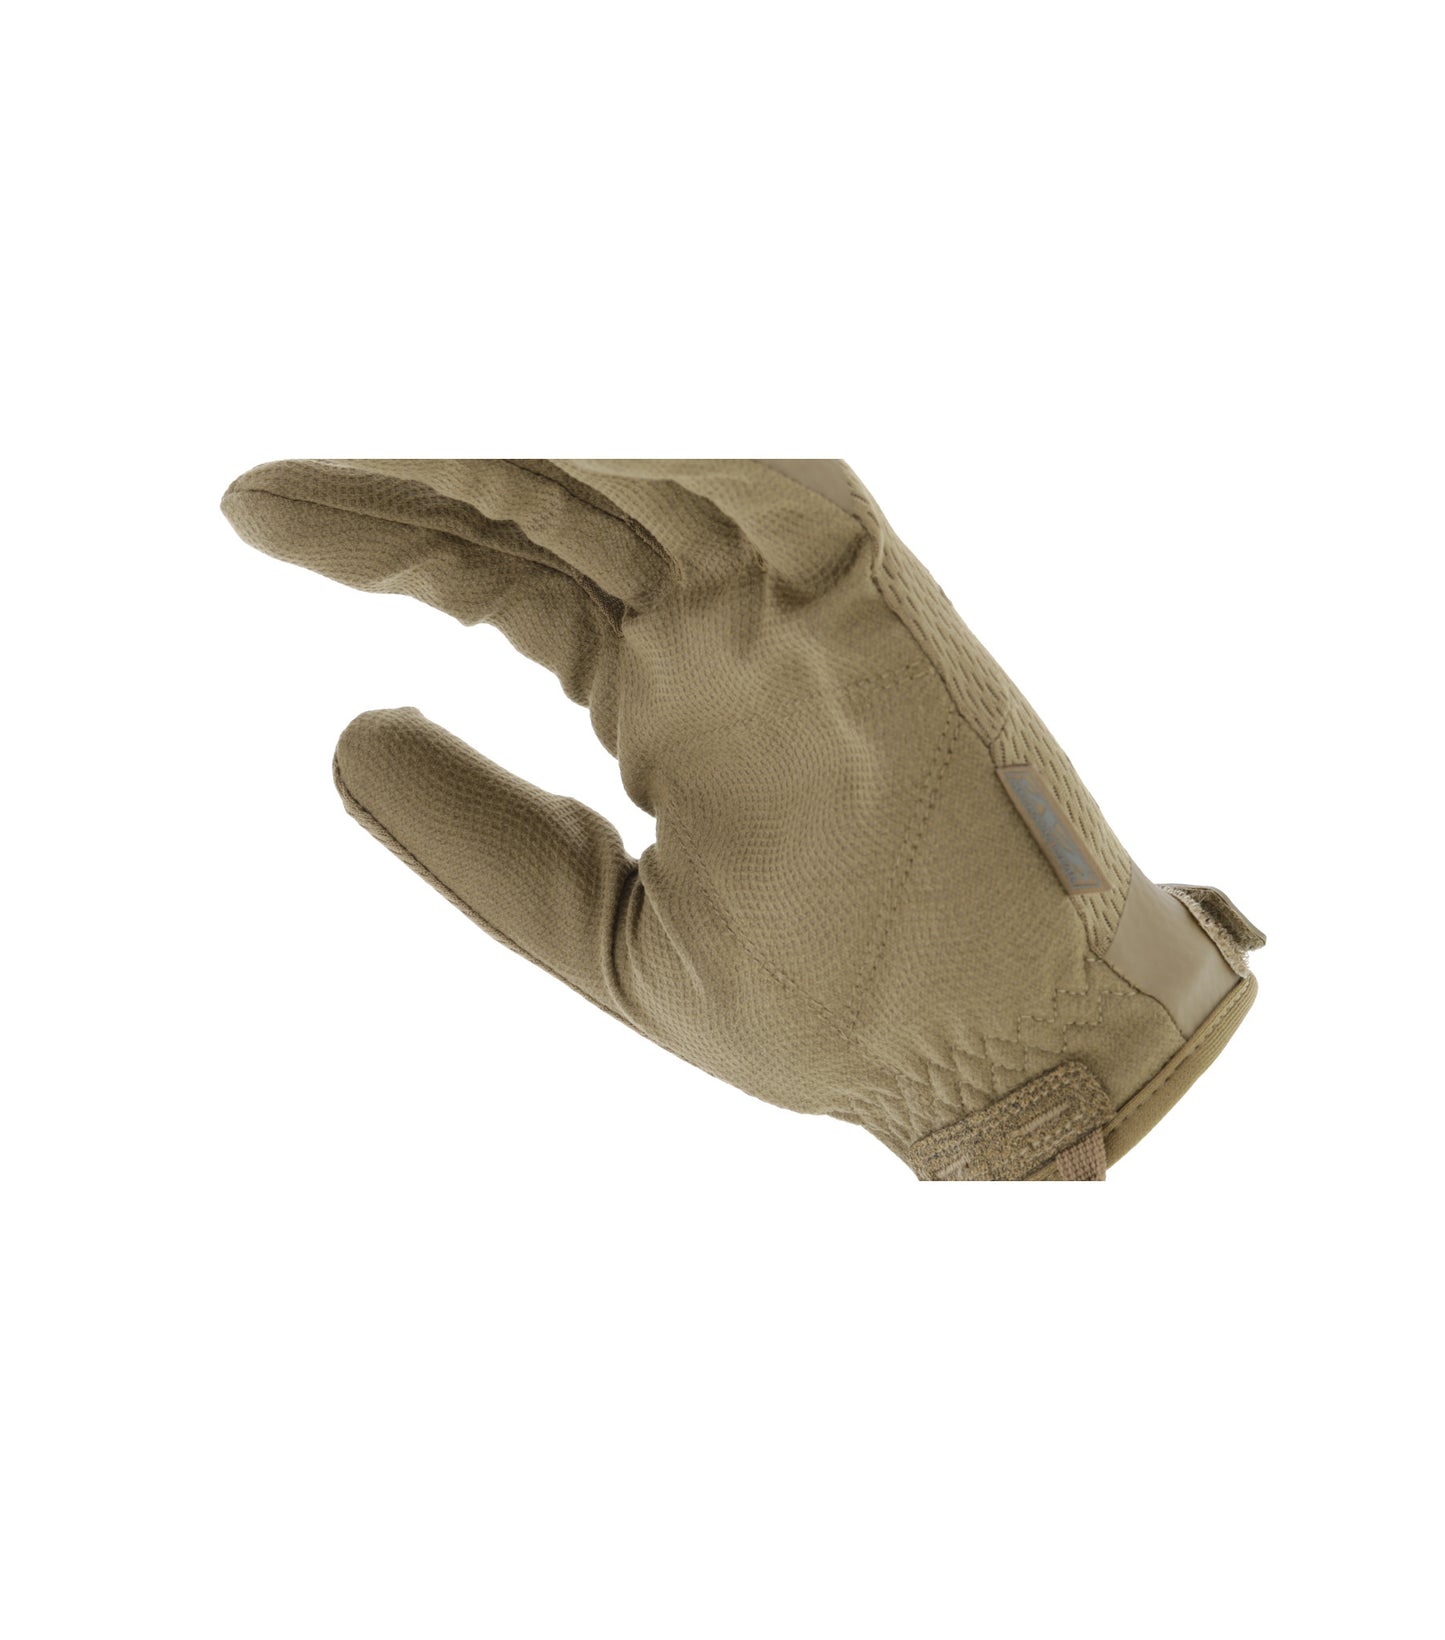 Specialty 0.5mm Coyote Glove